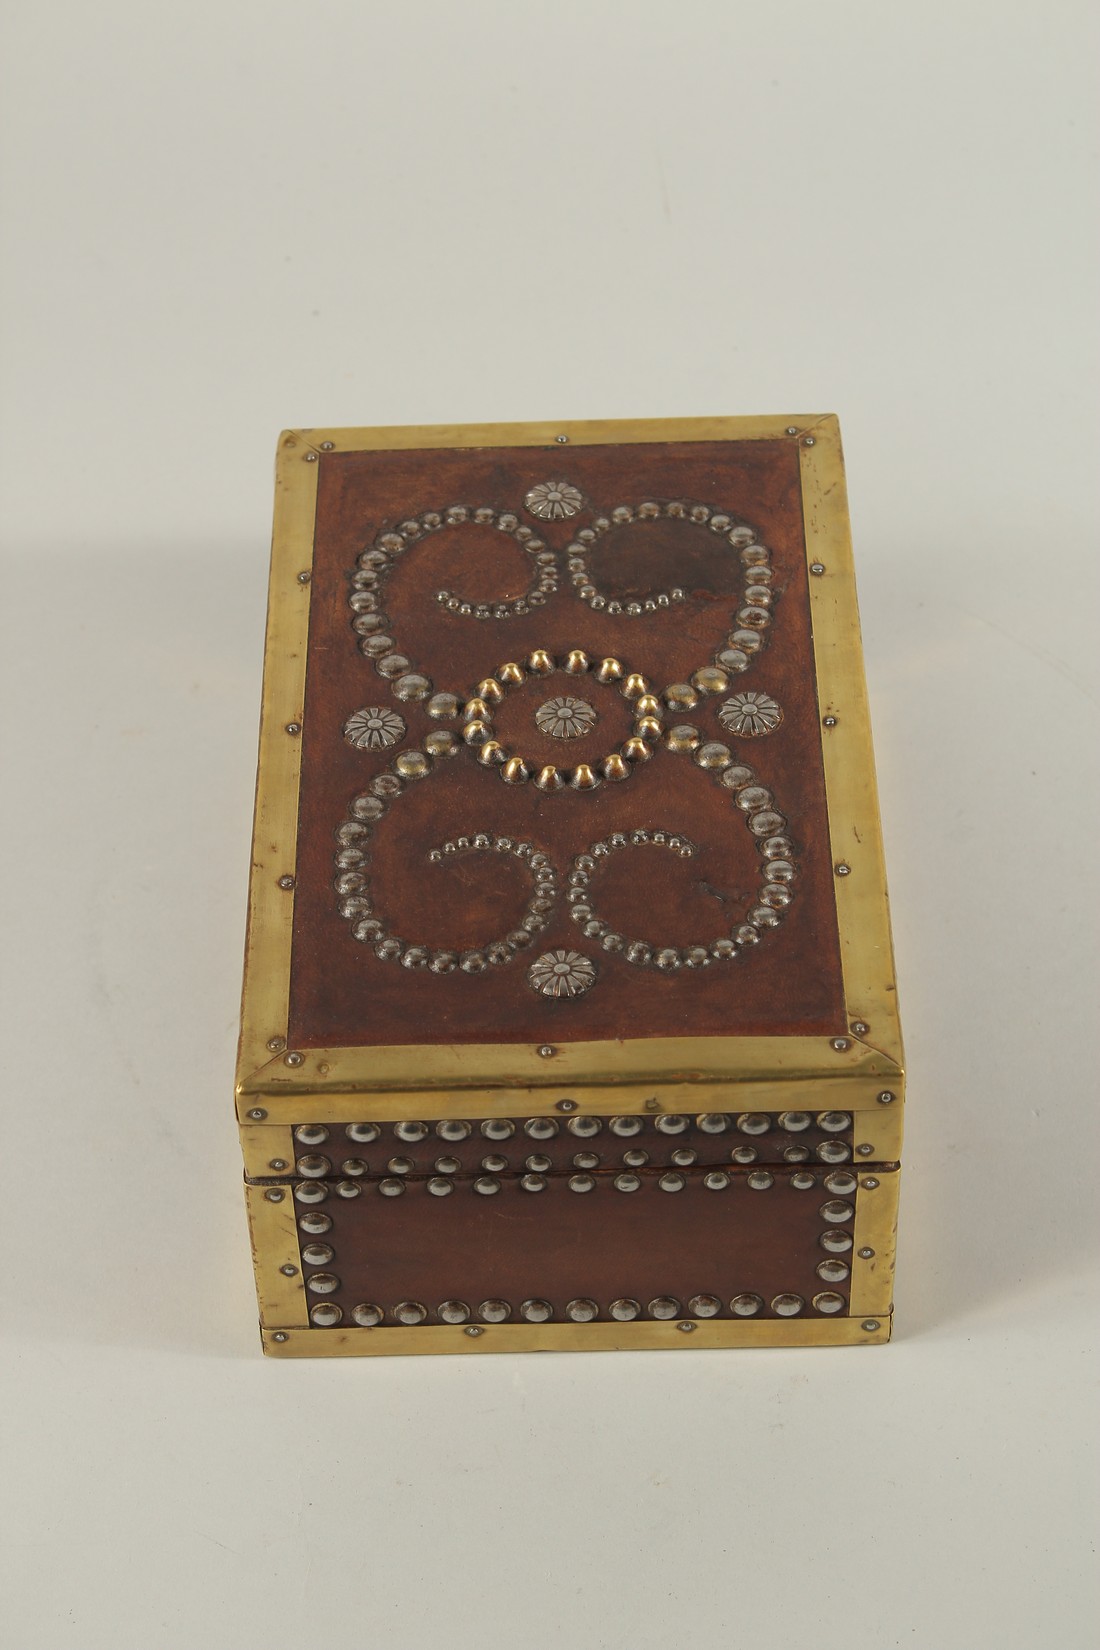 A BRASS BANDED AND STUDDED LEATHER BOX. 10ins long x 4ins high x 6ins deep. - Image 3 of 5